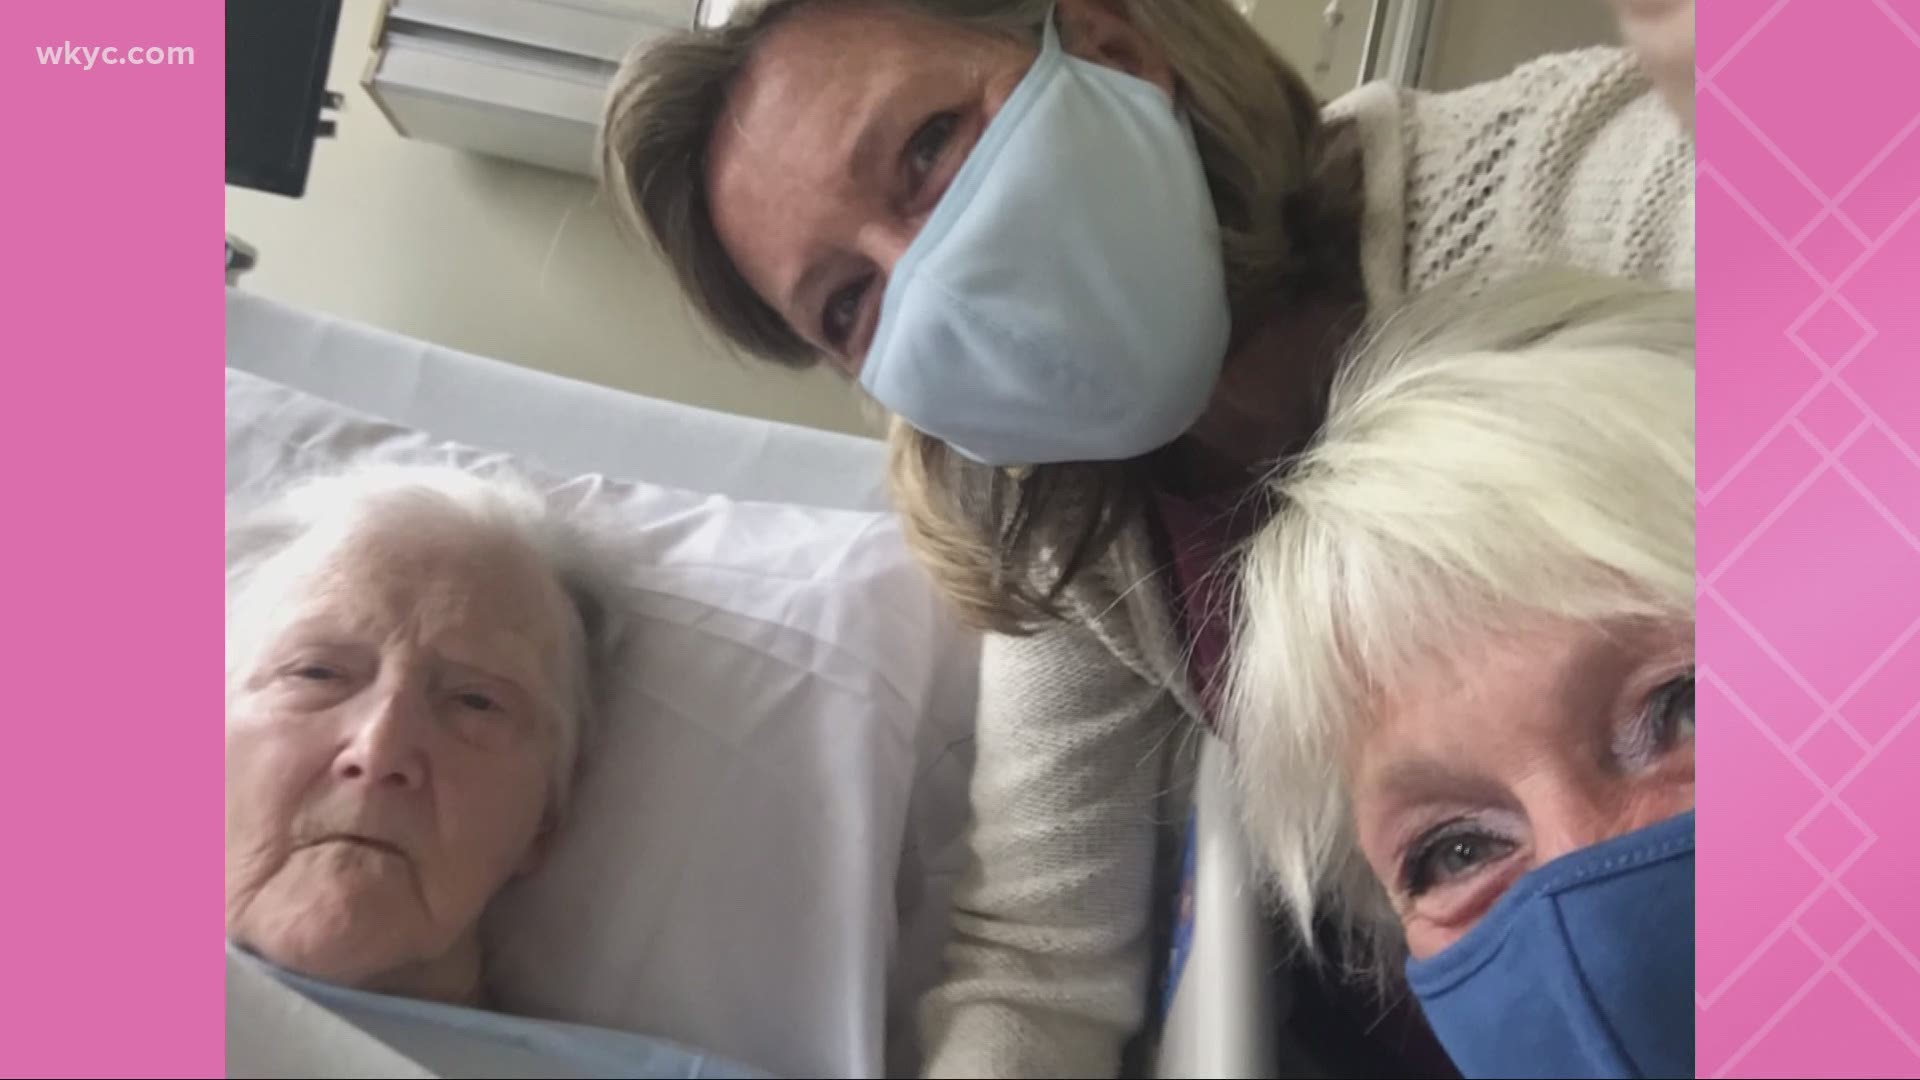 The sisters are grateful MetroHealth let both of them see their elderly mom after a nursing home wouldn't allow it. Romney Smith reports.